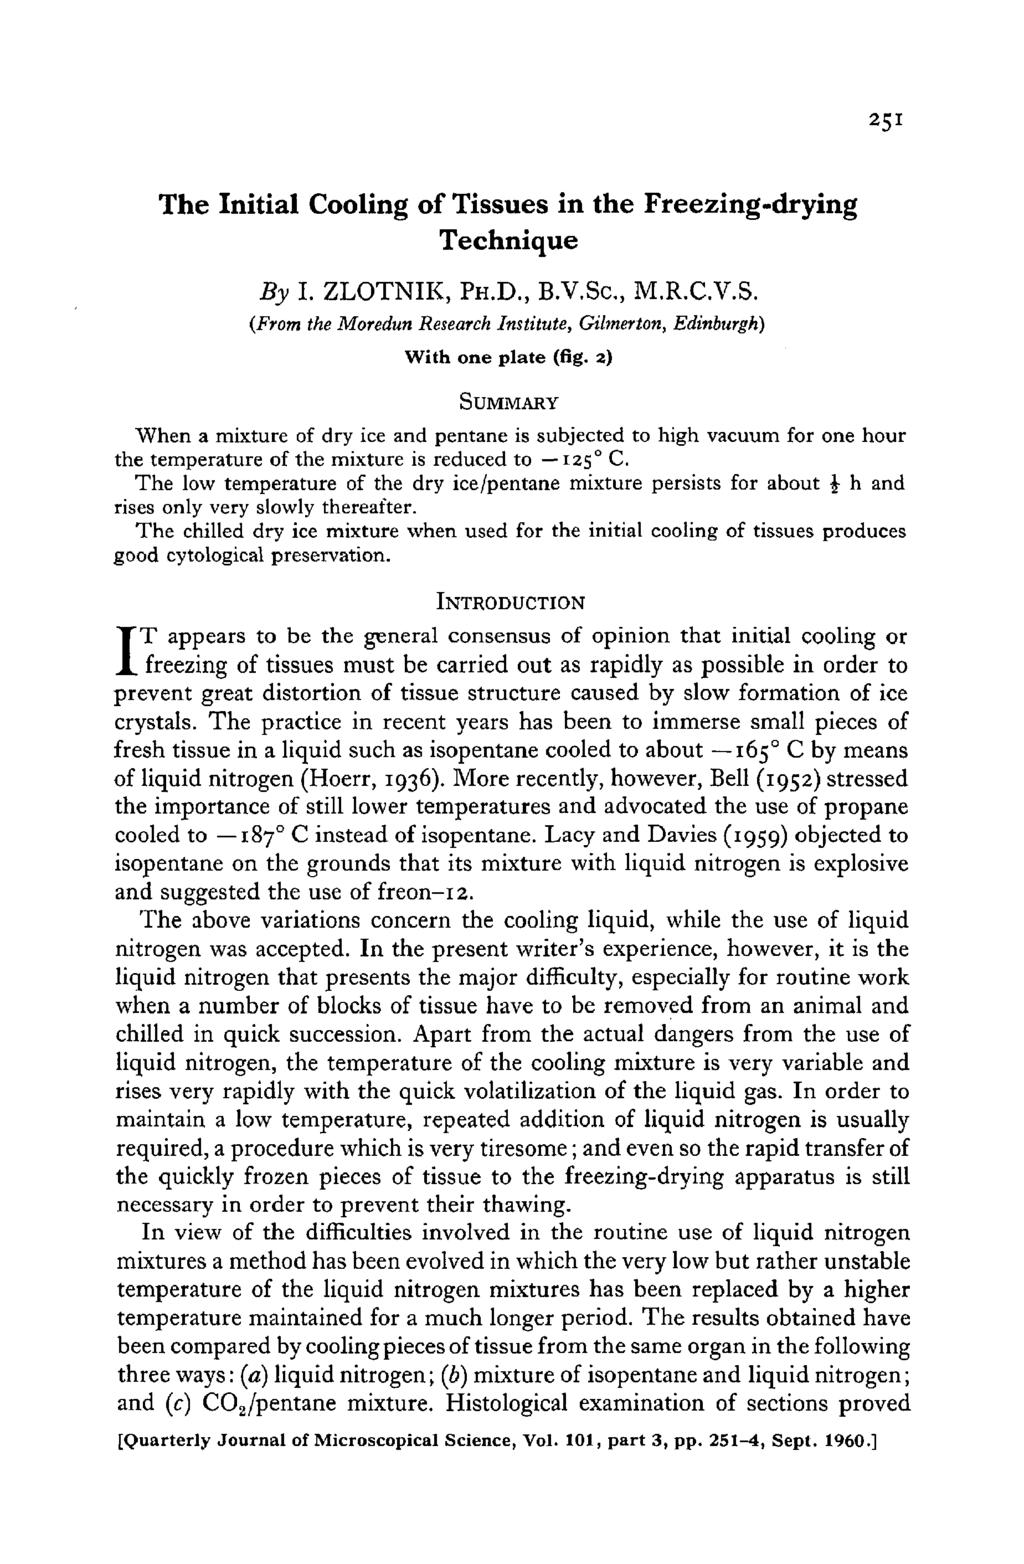 25 1 The Initial Cooling of Tissues in the Freezing-drying Technique By I. ZLOTNIK, PH.D., B.V.SC, M.R.C.V.S. (From the Moredun Research Institute, Gilmerton, Edinburgh) With one plate (fig.